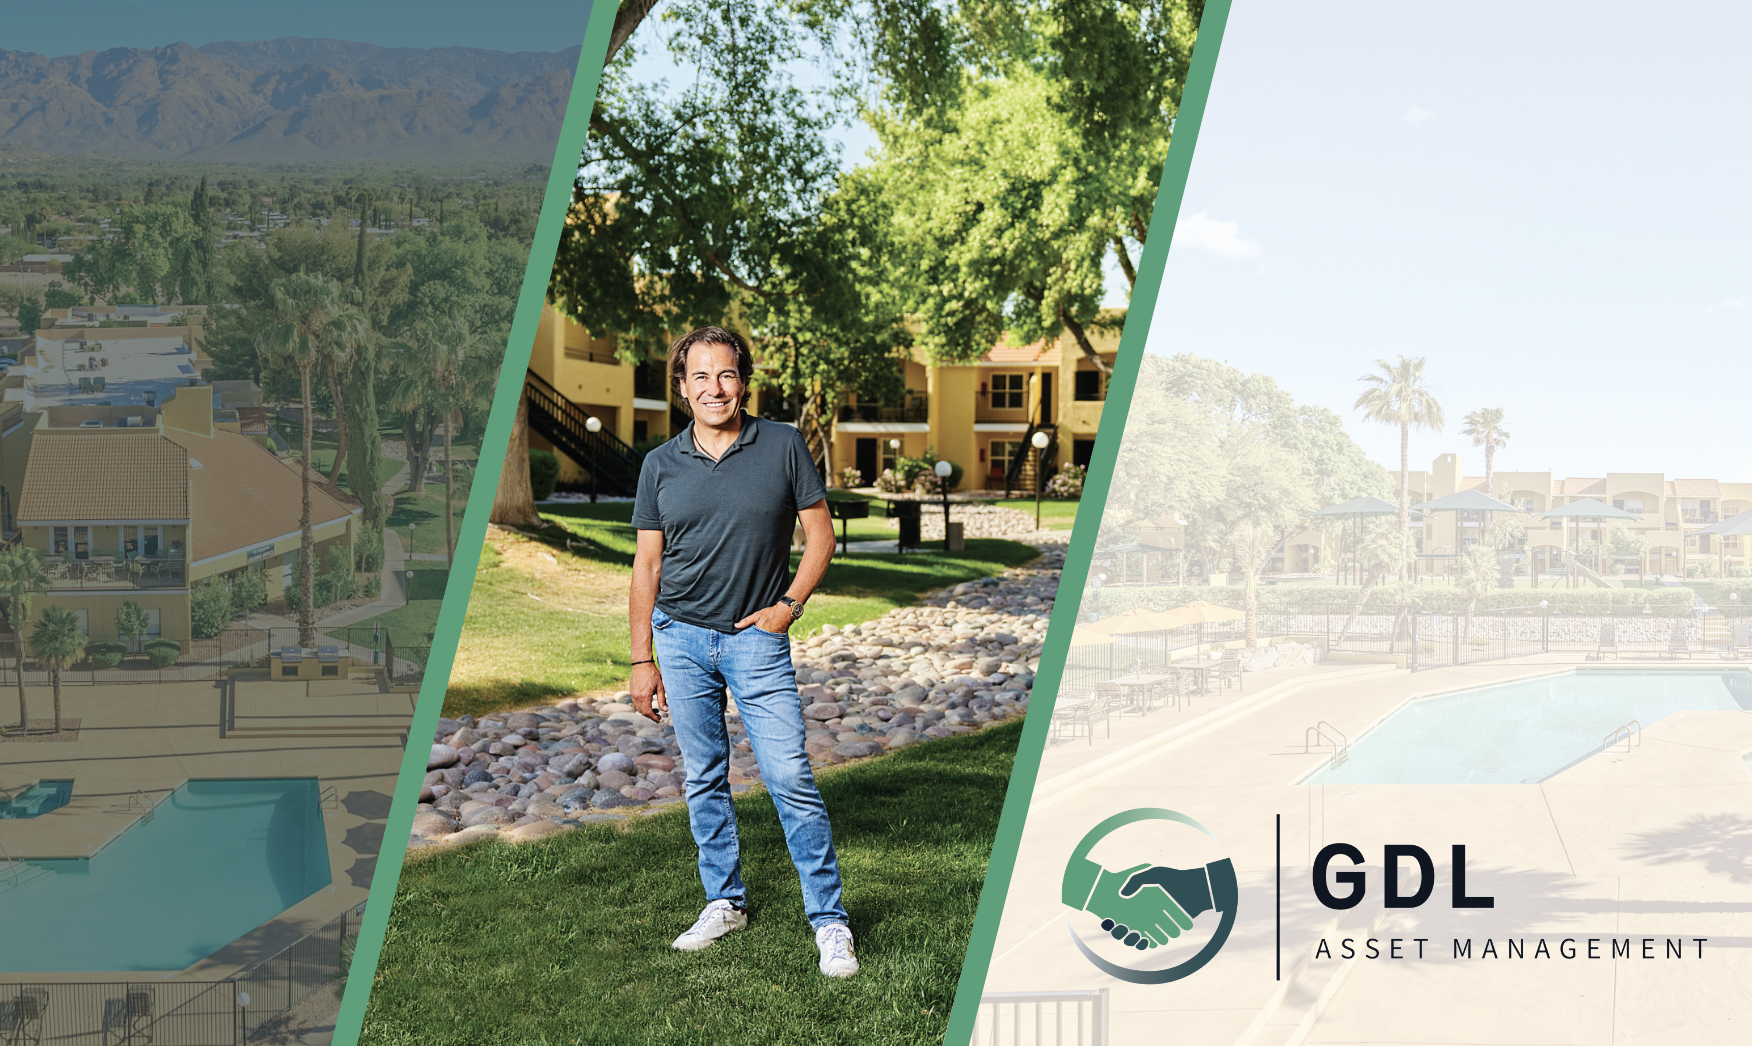 Pictured: Genaro Díaz, president and CEO of GDL Asset Management and Greenwater Real Estate Management